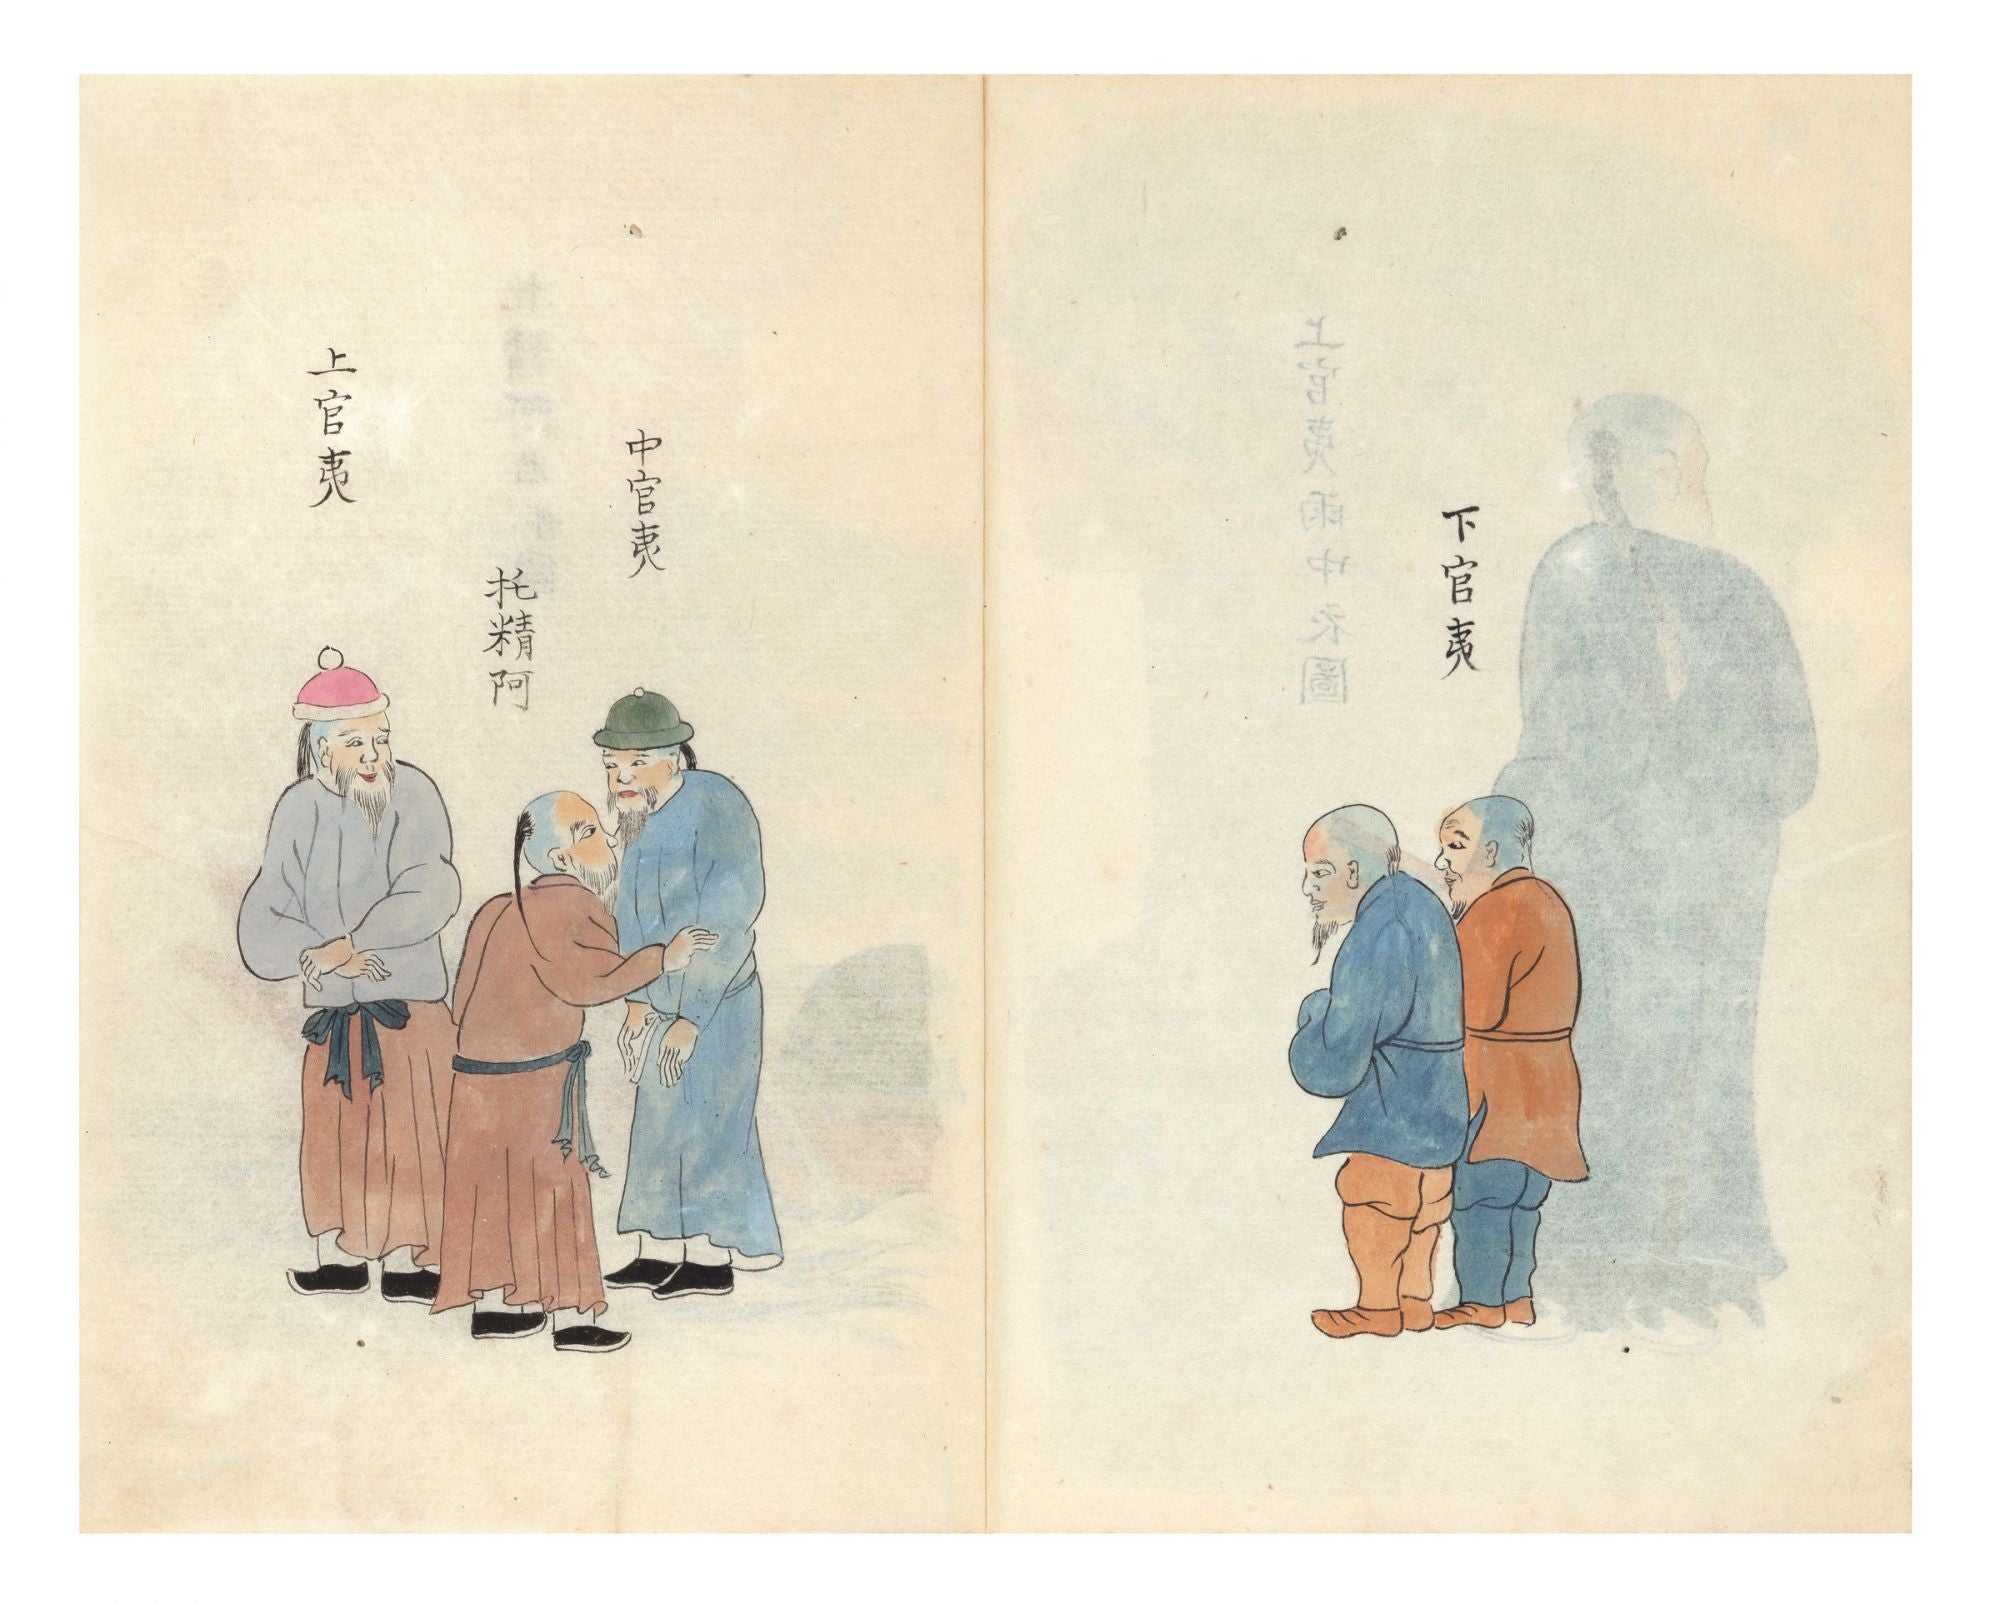 Manuscript on paper, entitled “Todatsu kiko” “Travels in the Region of  Eastern Tartary” by Rinzo MAMIYA on JONATHAN A. HILL, BOOKSELLER, INC